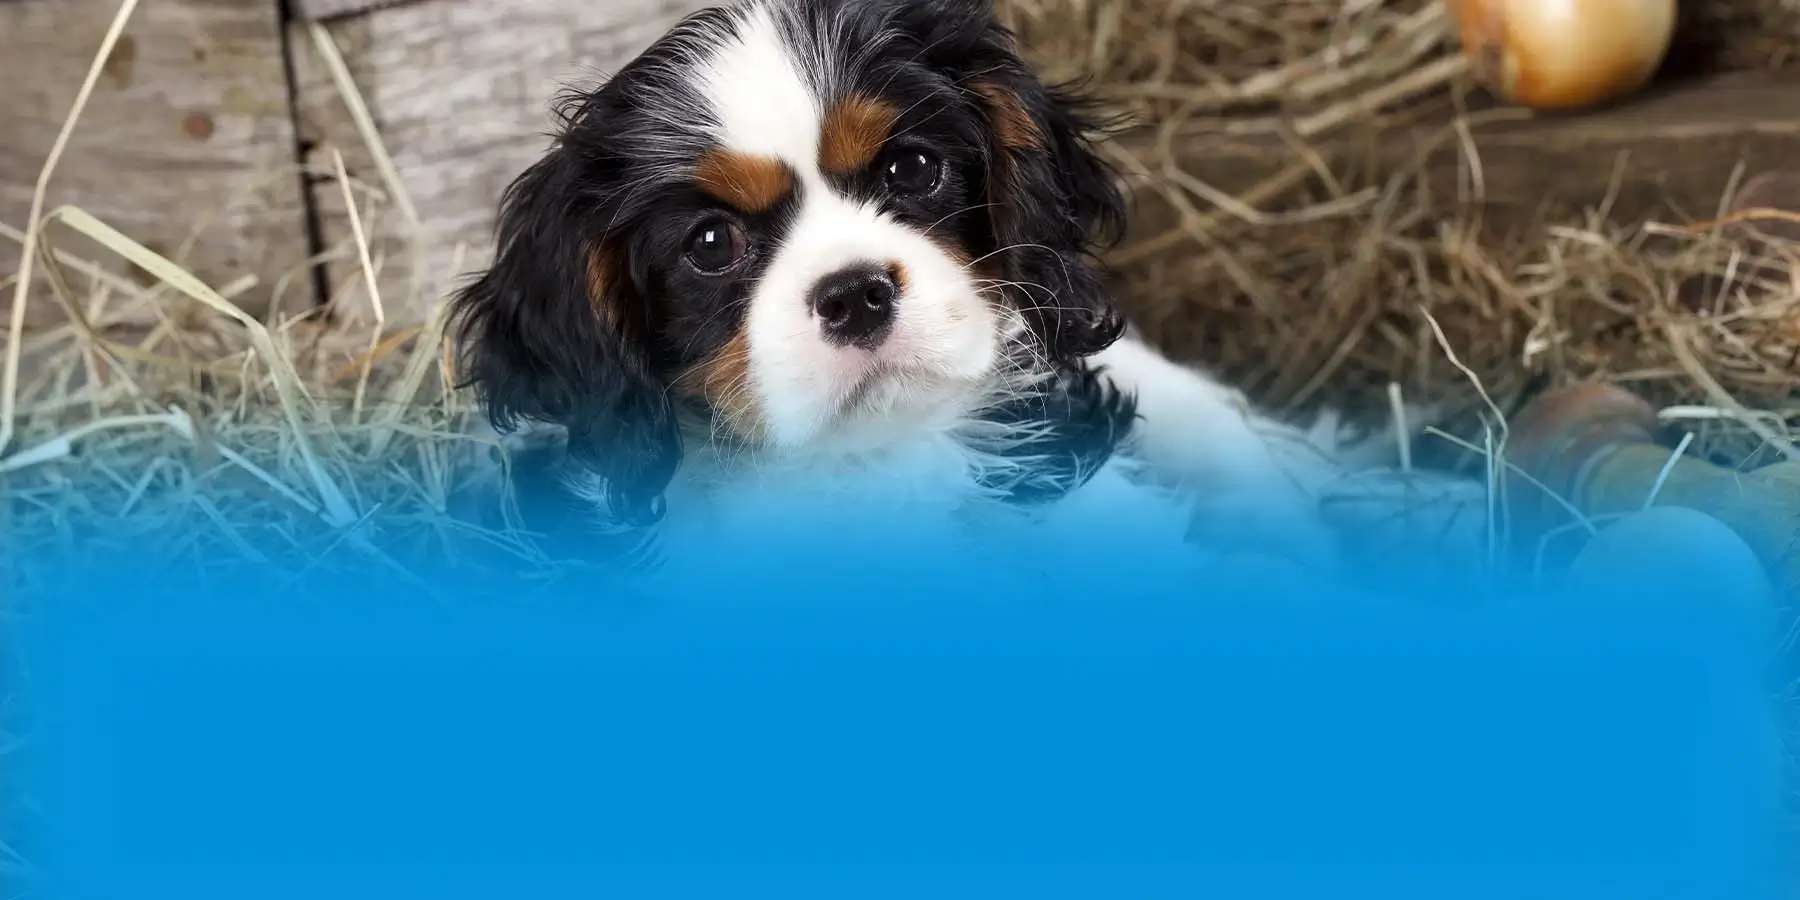 Cavalier King Charles Spaniel puppy with onions.